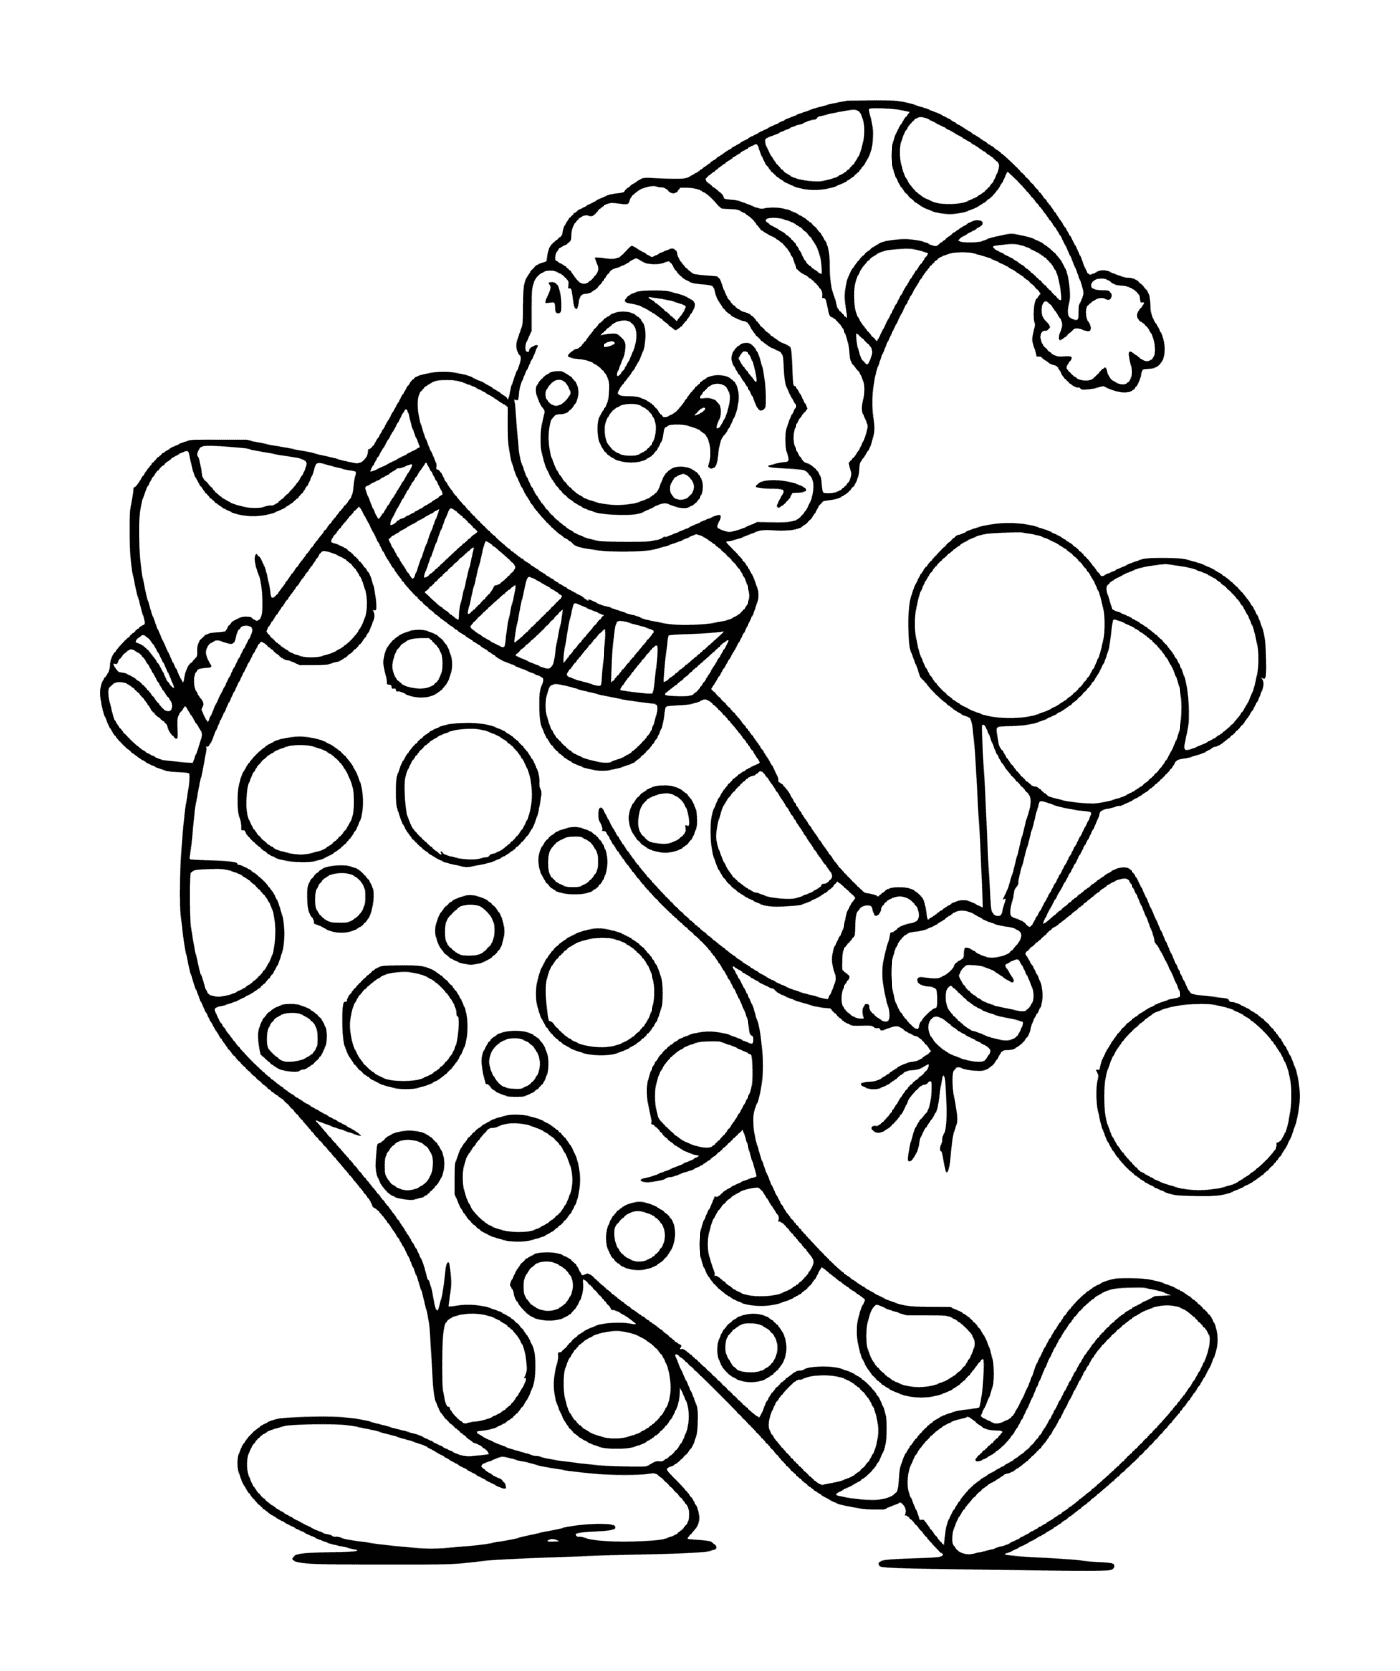  Party Clown Holding Party Balloons 